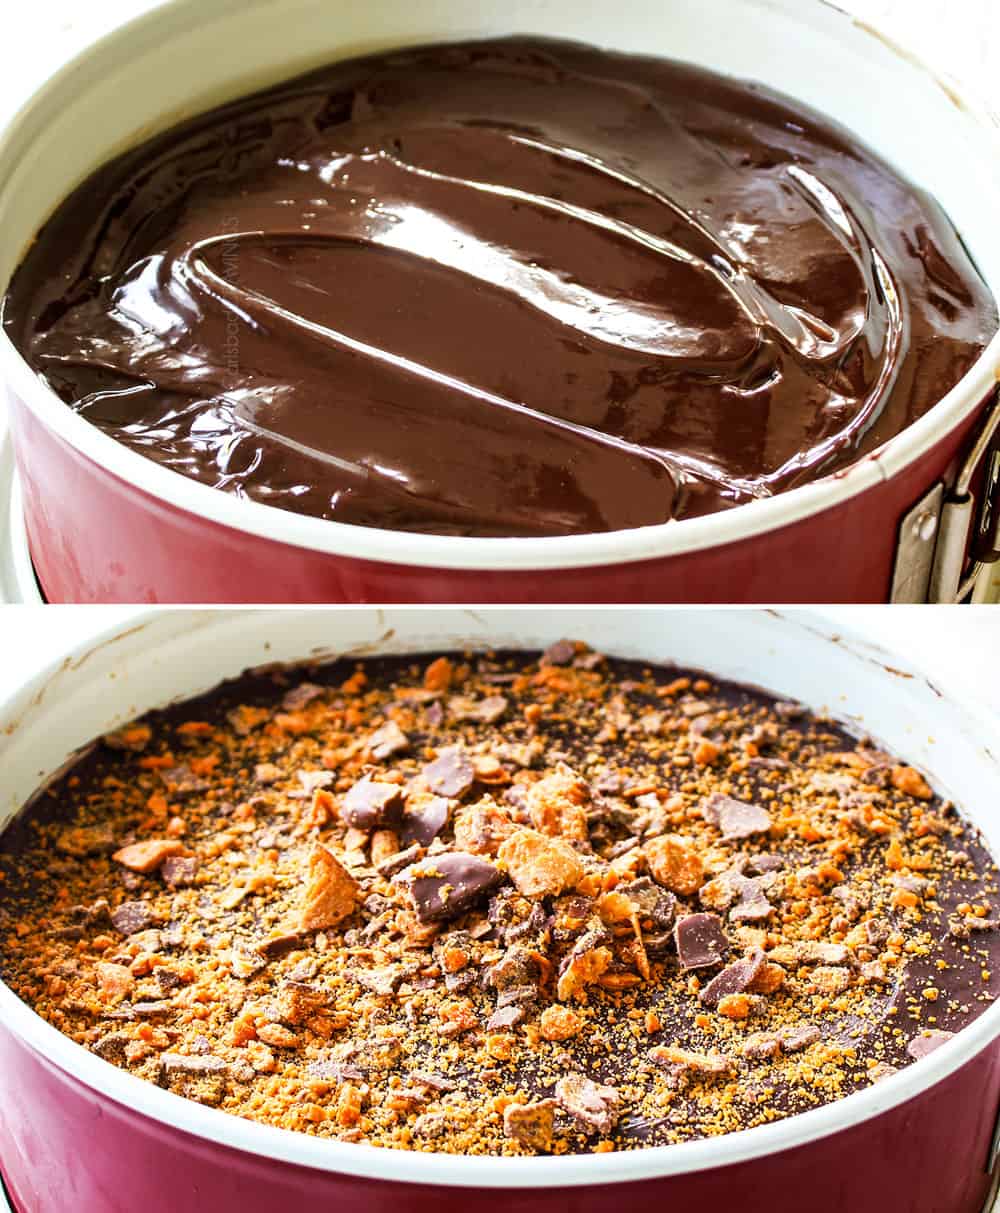 a collage showing how to make Butterfinger pie by smoothing ganache over the peanut butter filling then adding crushed Butterfinger